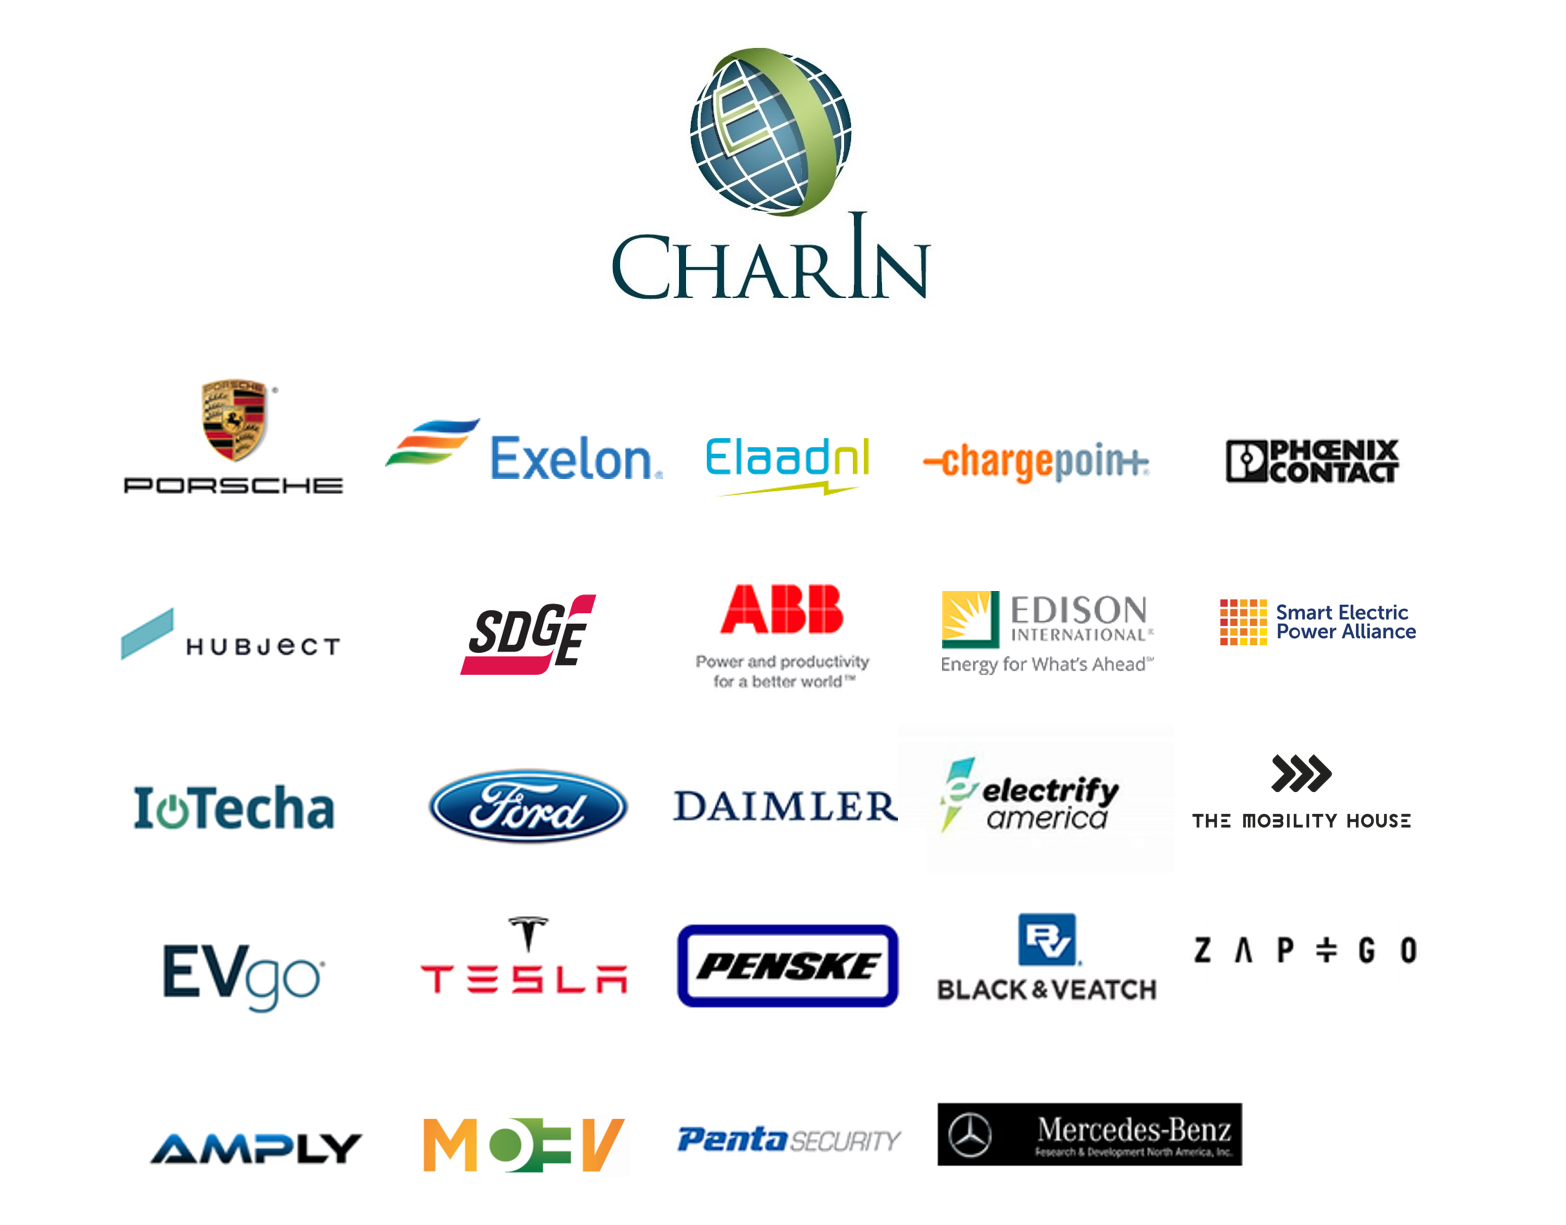 THE 3RD CHARIN NORTH AMERICA CONFERENCE IS QUICKLY APPROACHING!